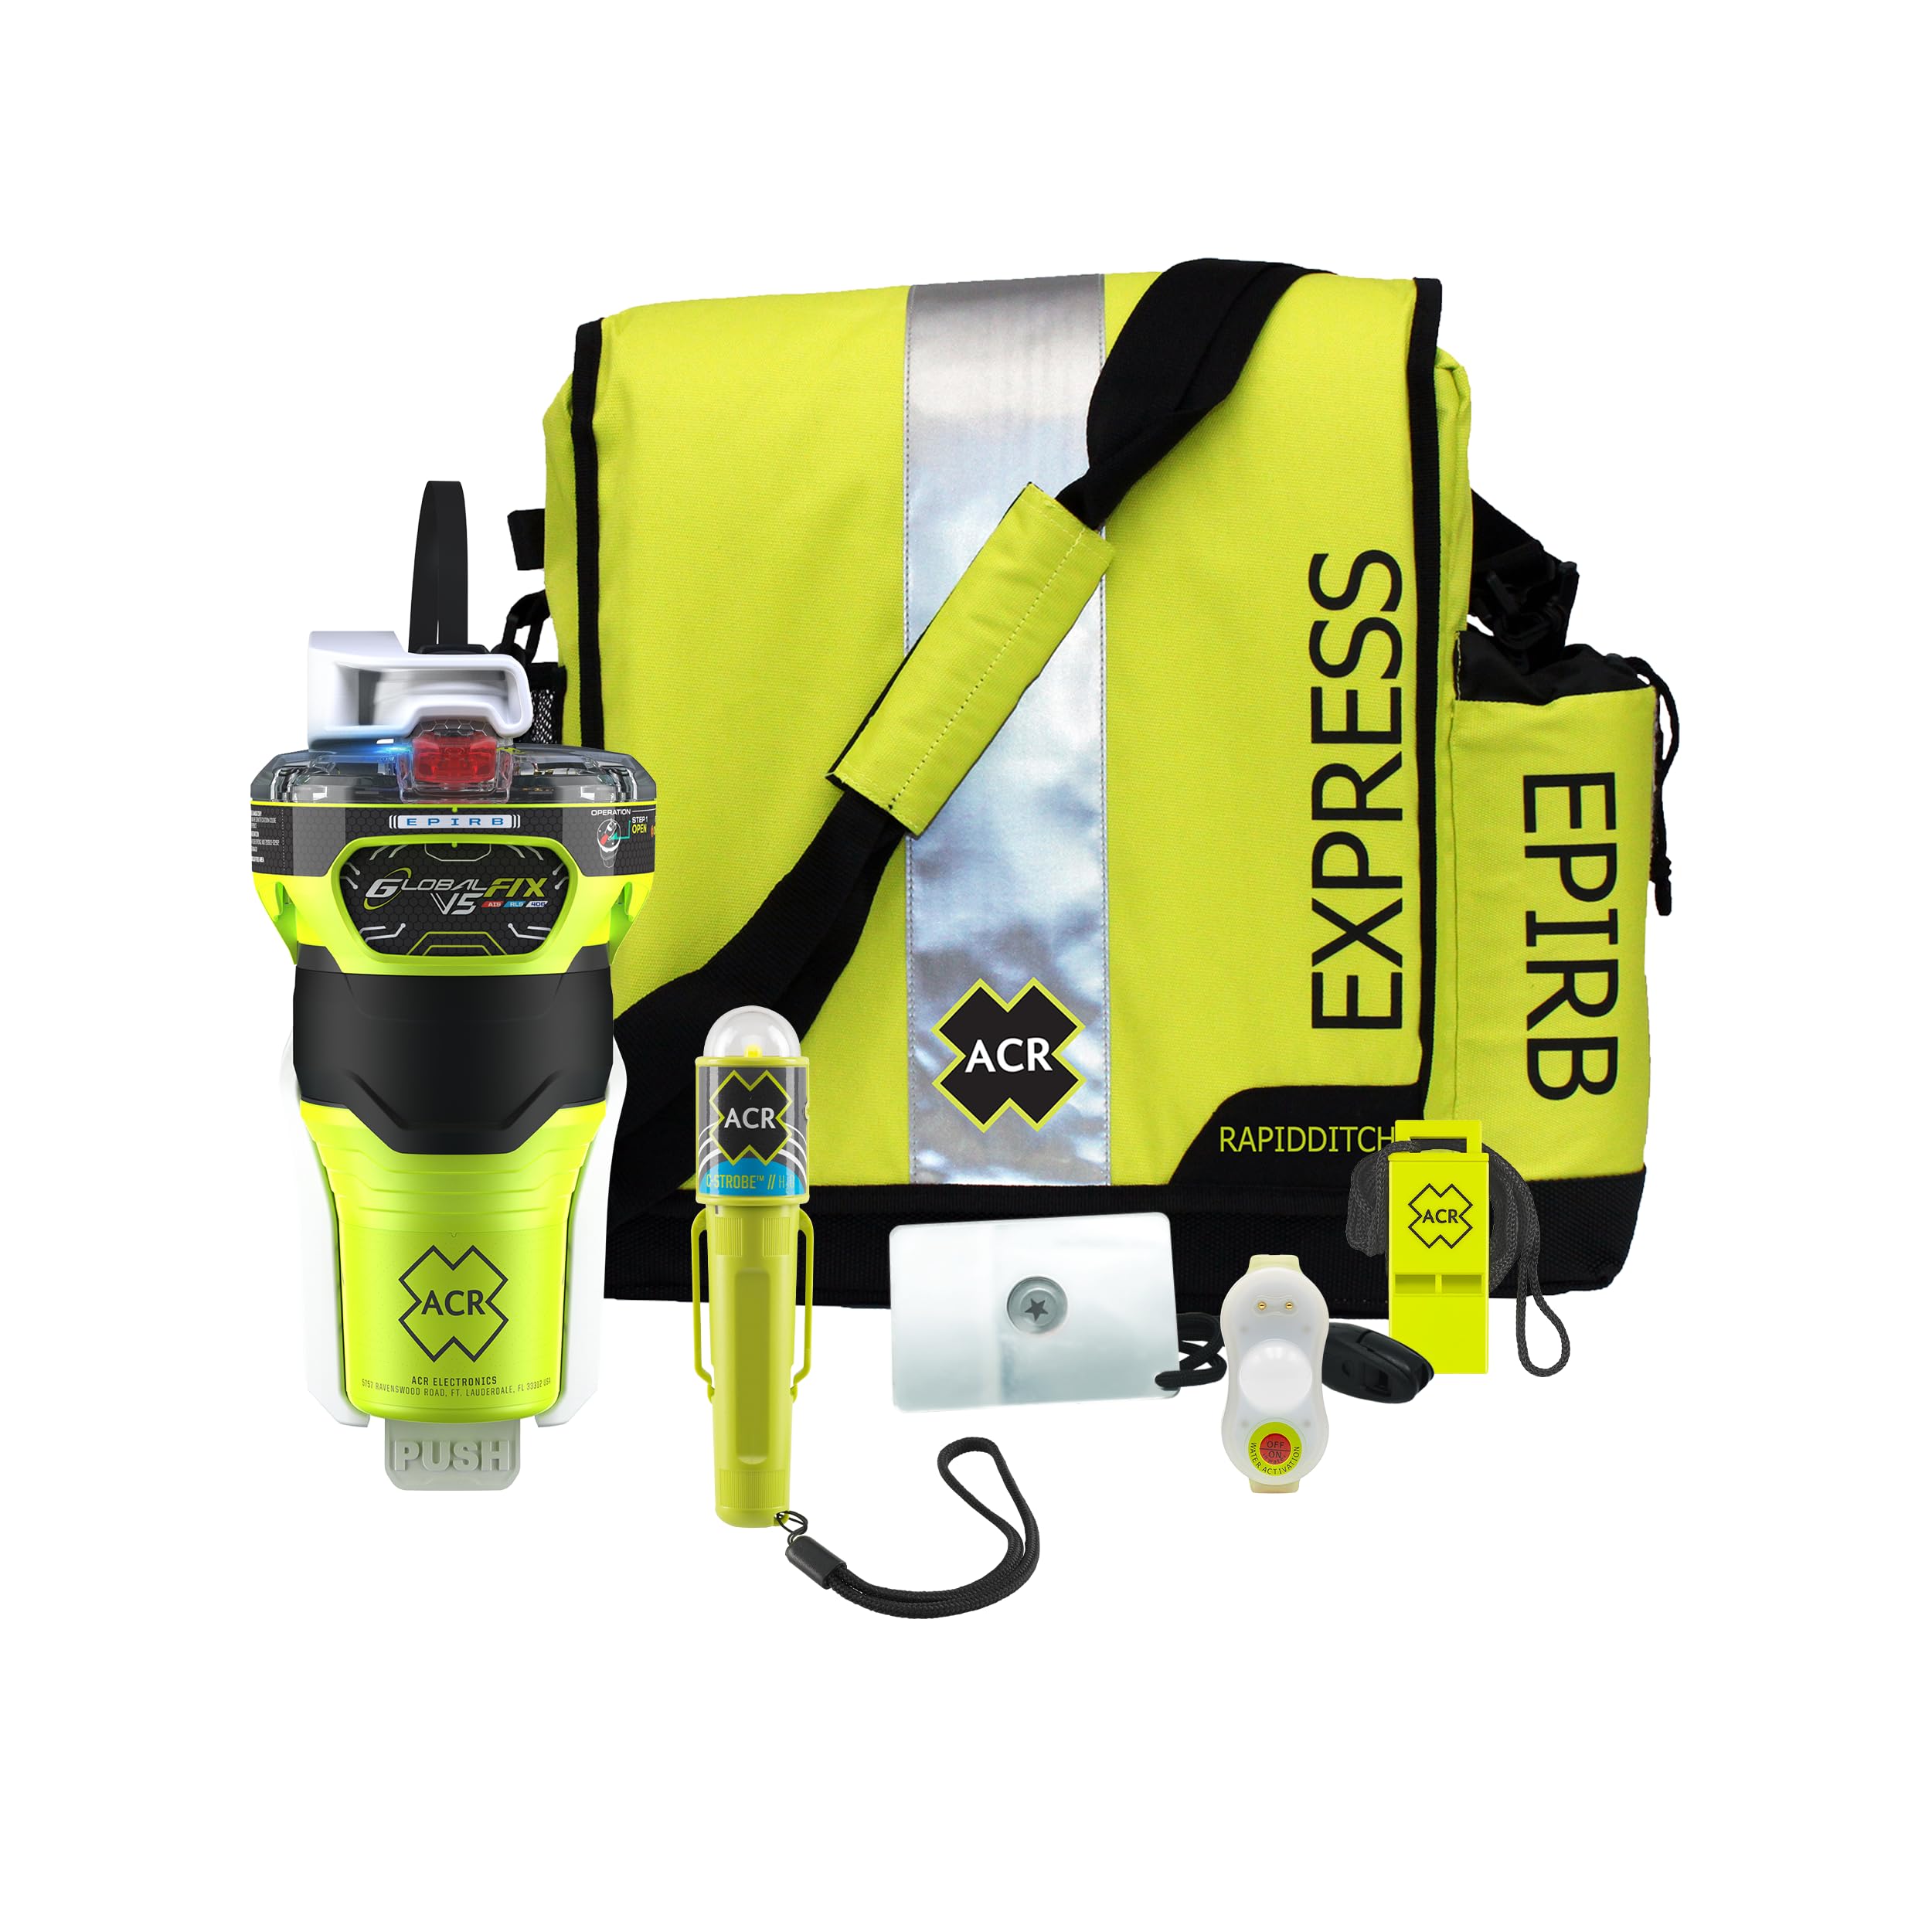 EMI | Search and Rescue Basic Response Kit™